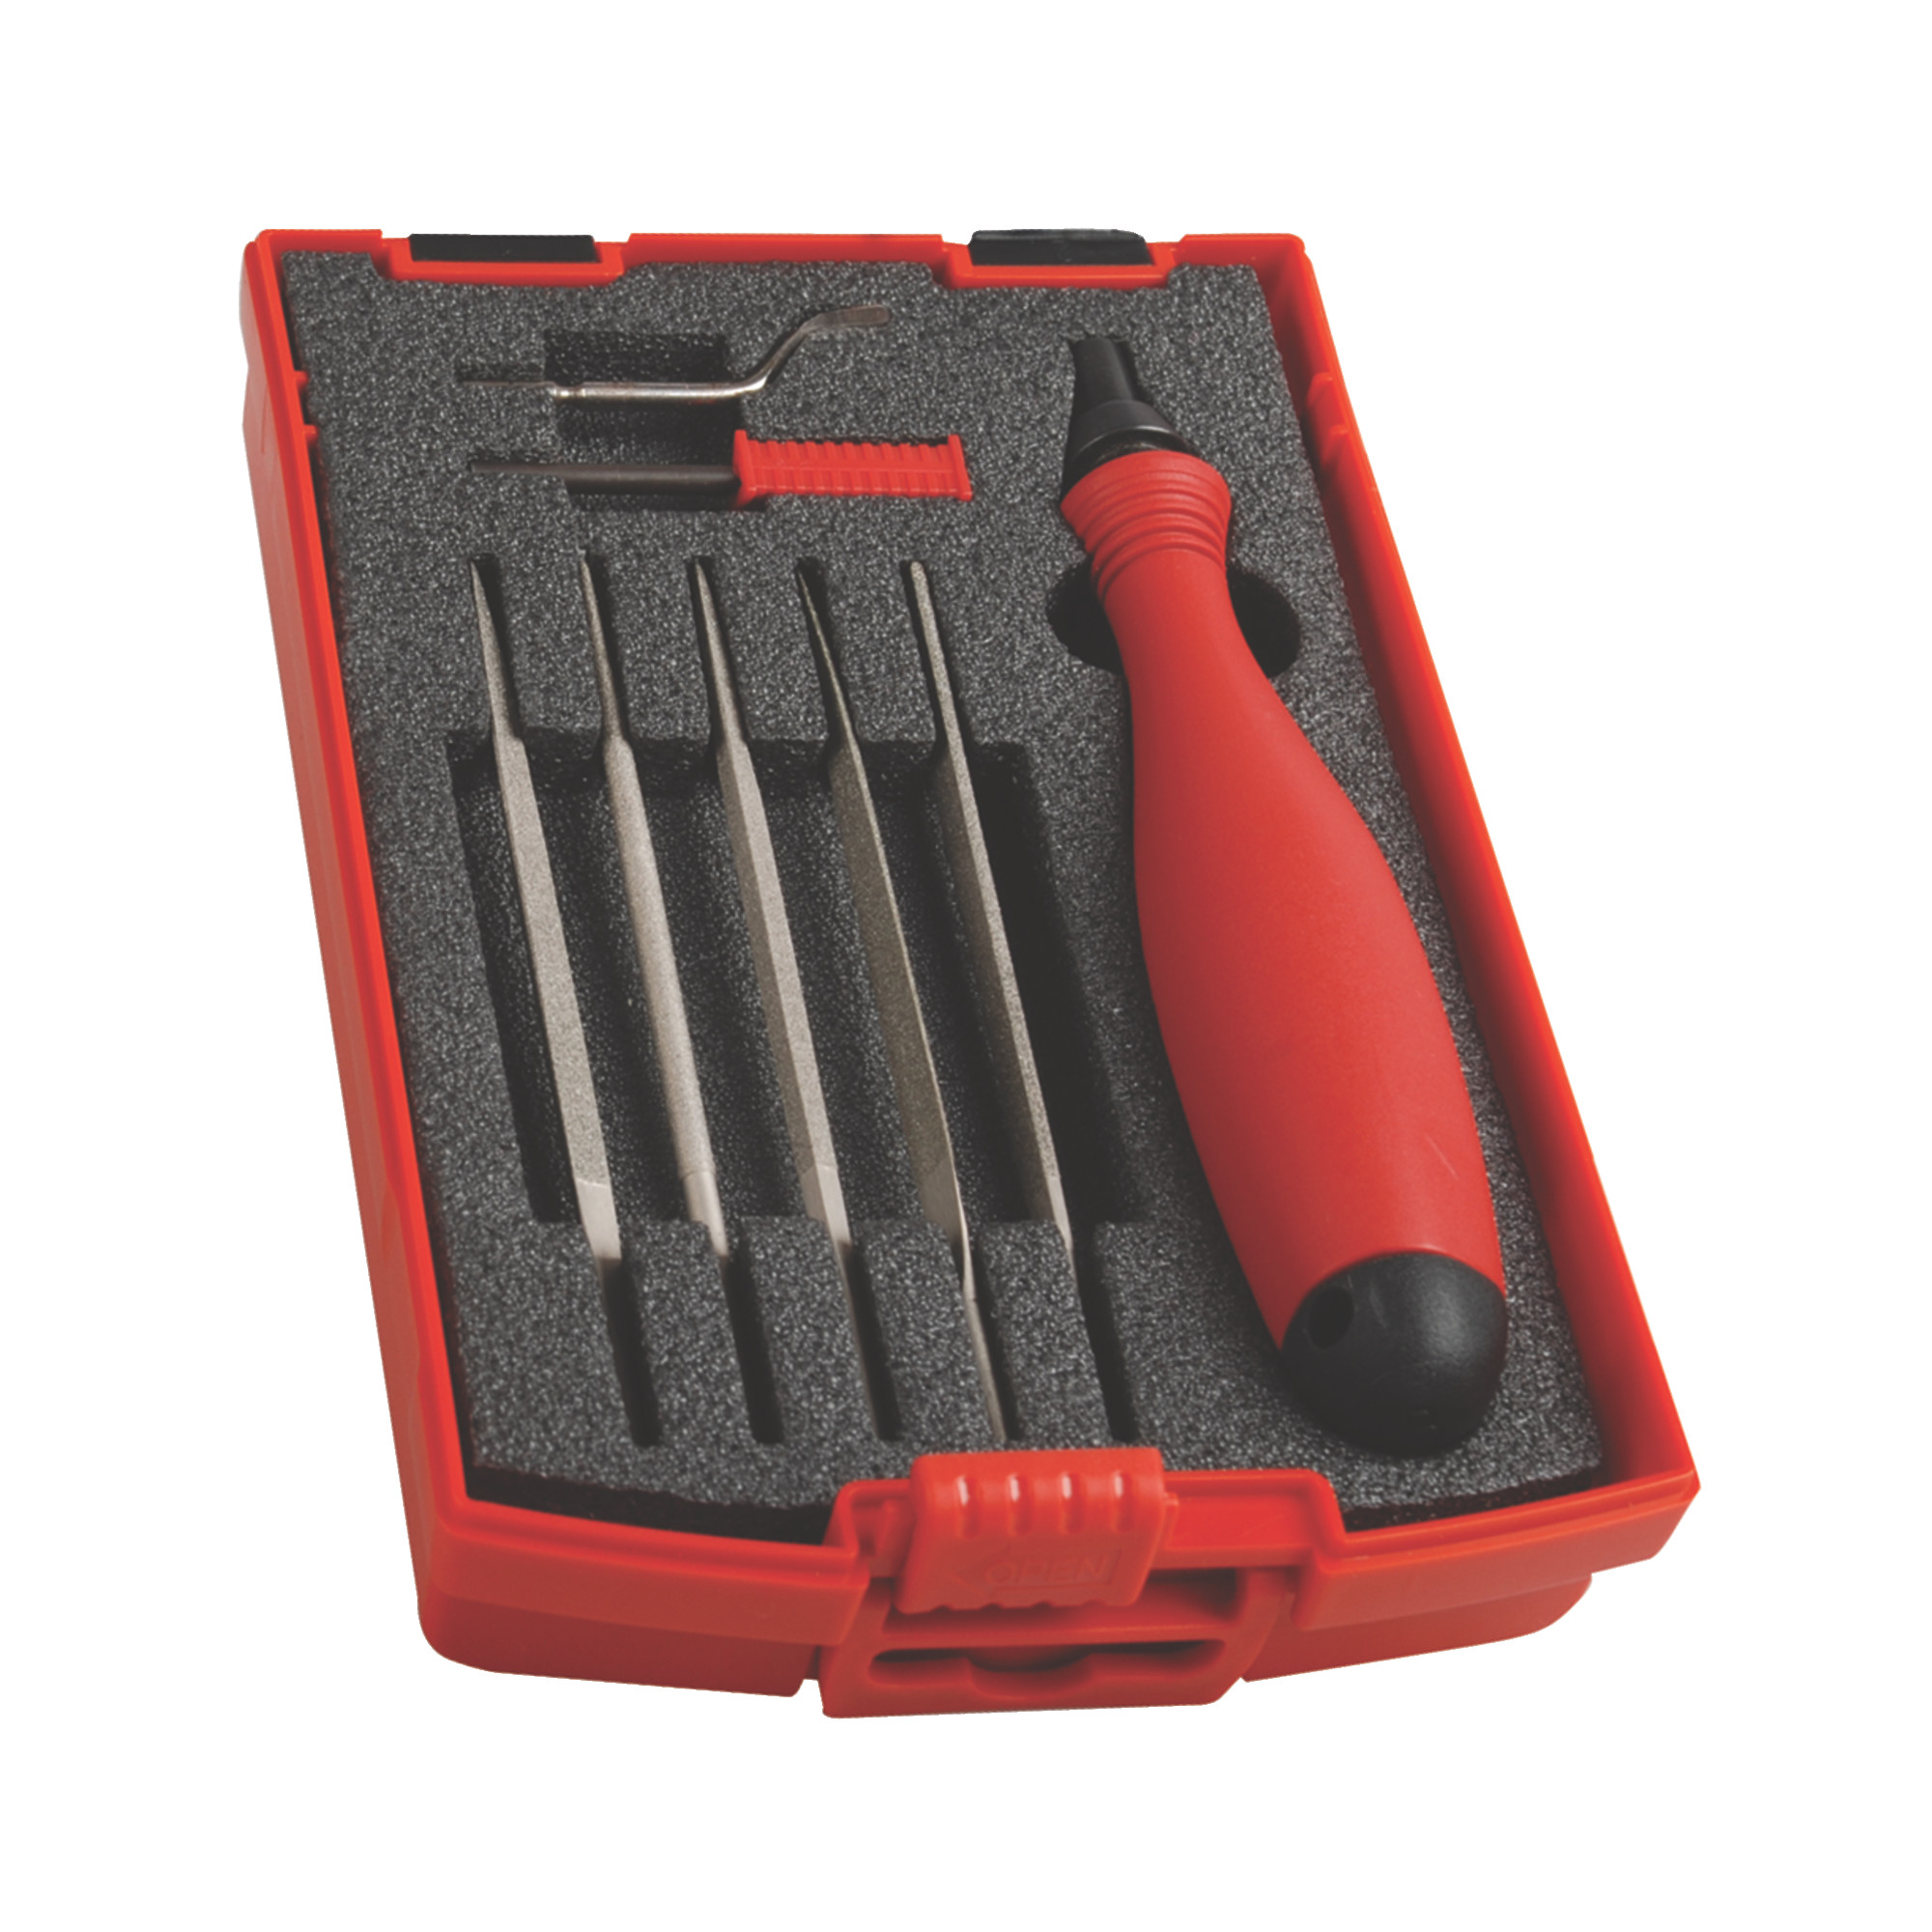 SHAVIV 154-00030 8 Piece Filing and Deburring Set   INCLUDES: (1) MB2020E Handle.(5) Different Shape Diamond Coated File